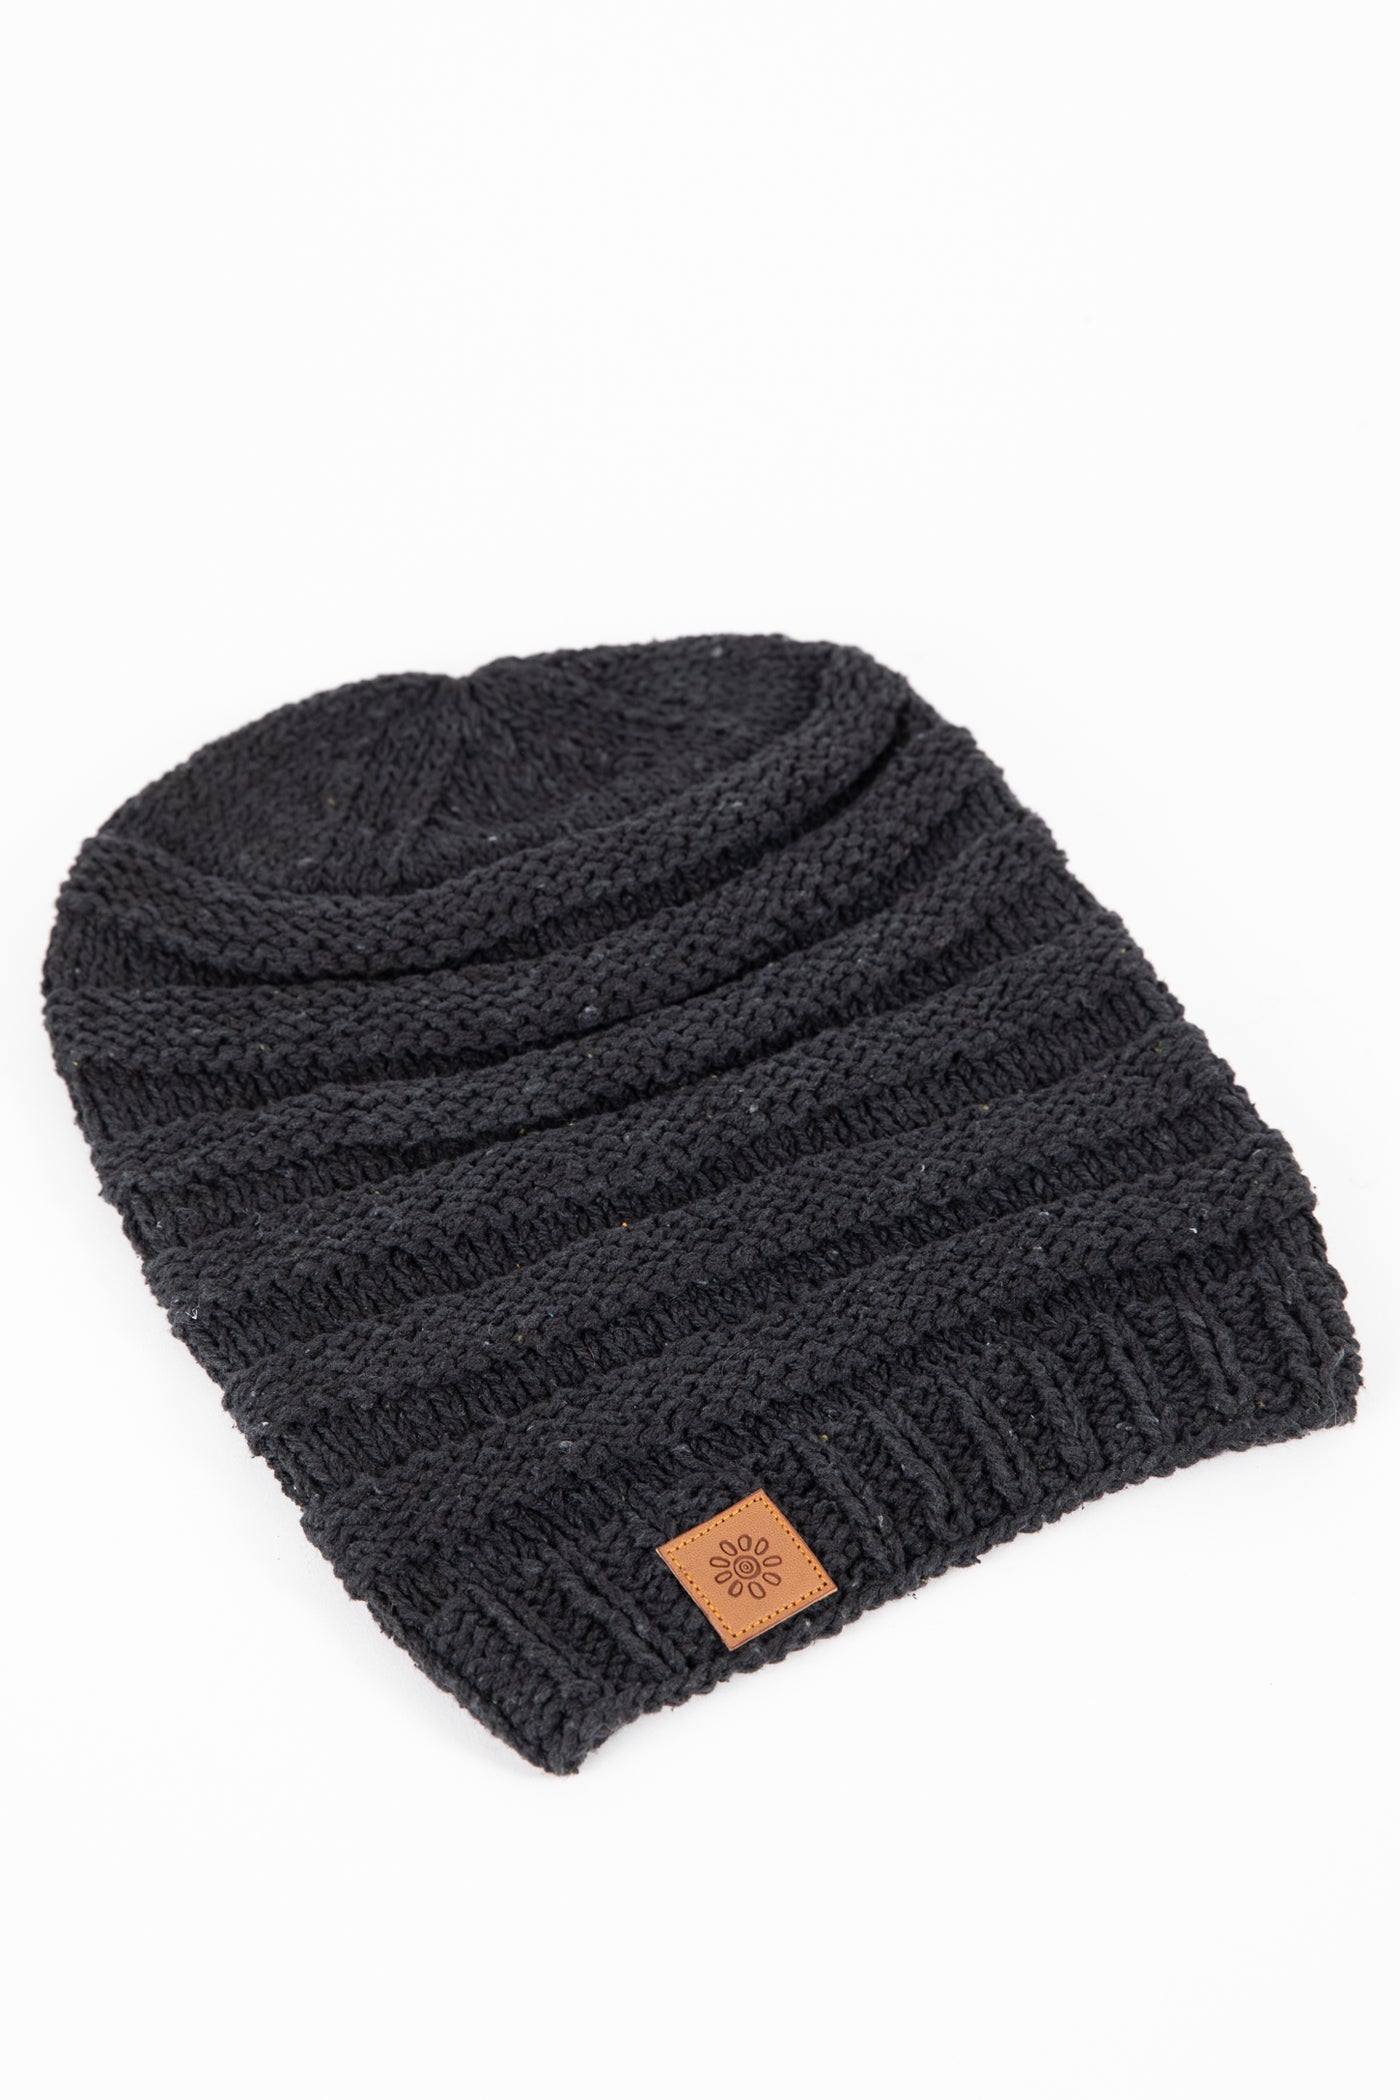 Mexicali · Slouch Beanie Blues Cotton Ribbed